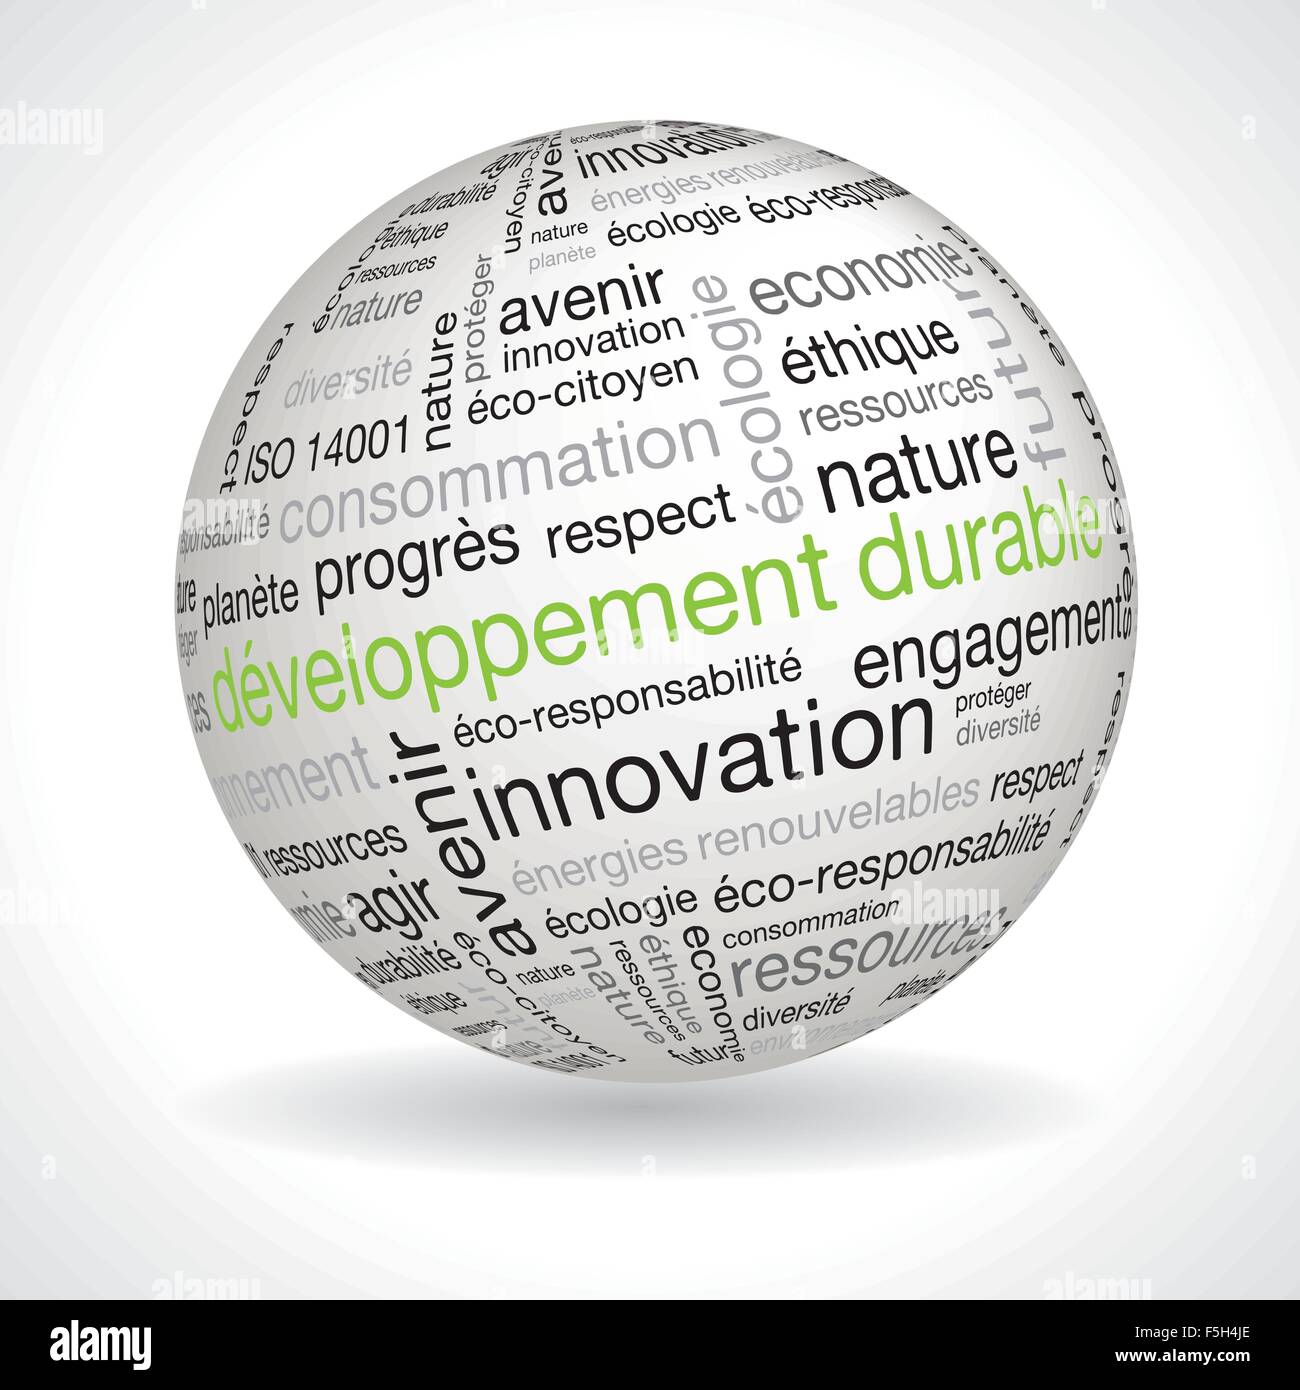 French sustainable development theme sphere with keywords full vector Stock Vector